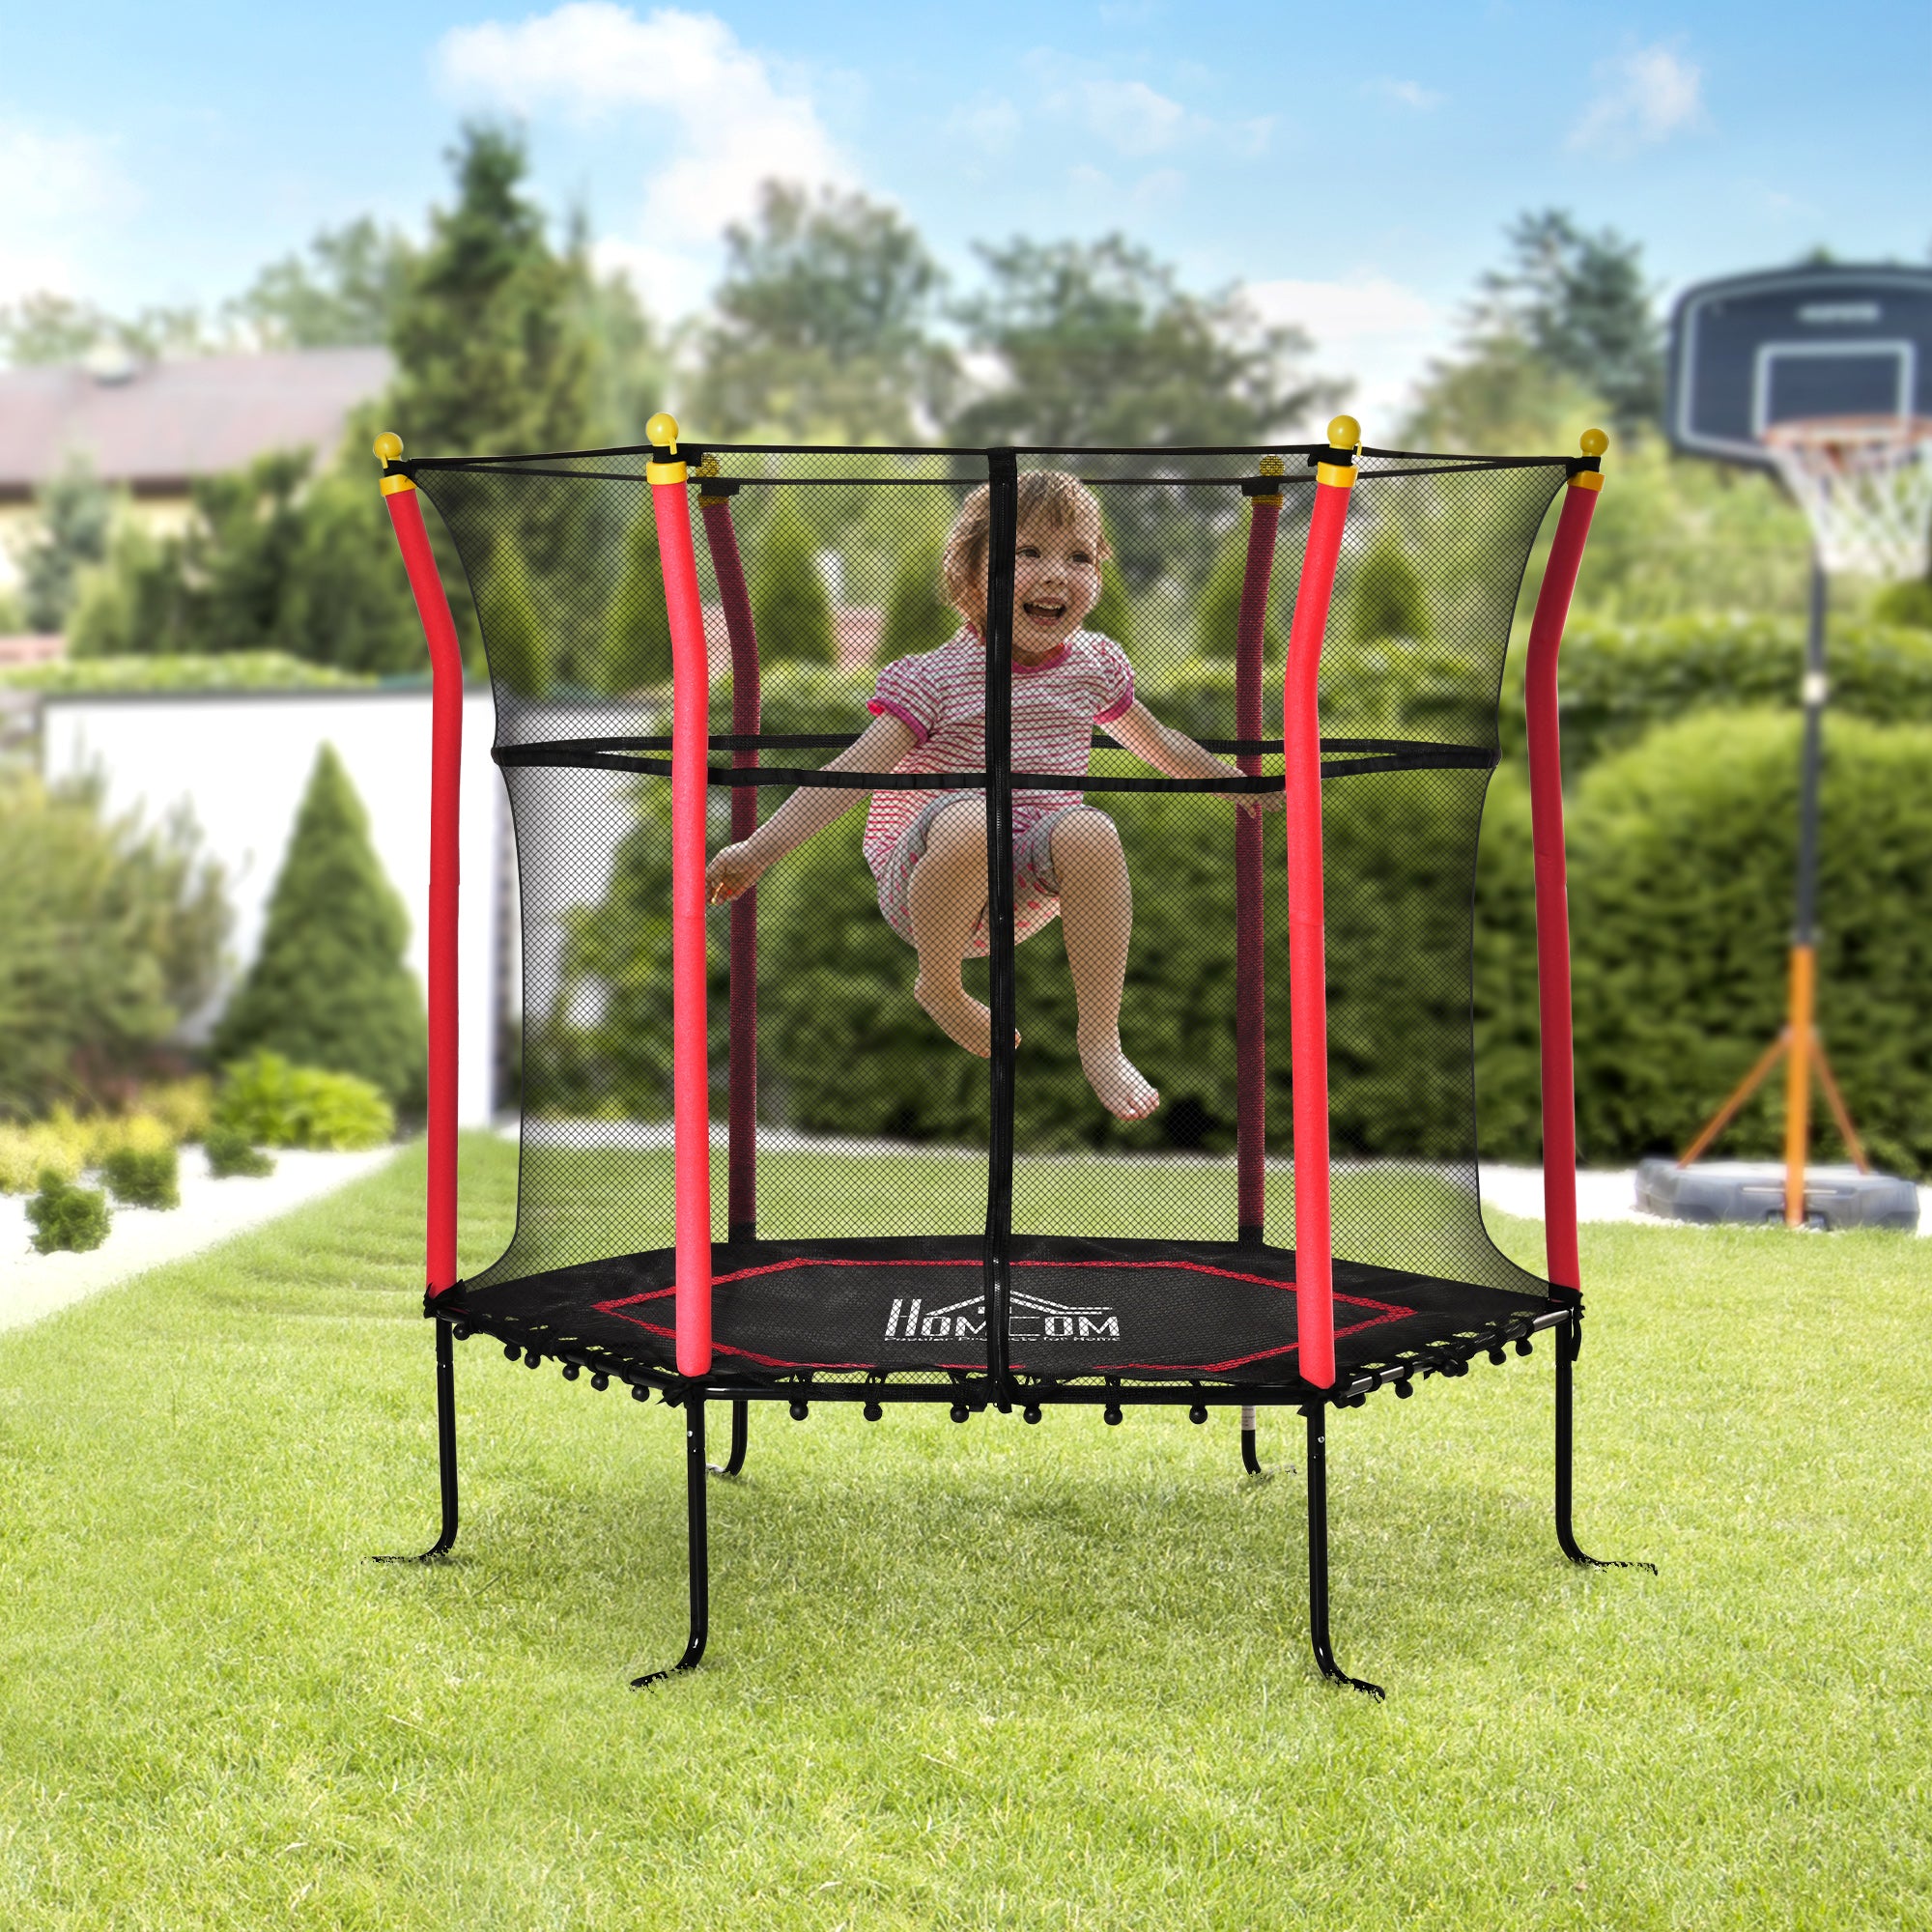 HOMCOM 5.2FT / 63 Inch Kids Trampoline With Enclosure Net Mini Indoor Outdoor Trampolines for Child Toddler Age 3 - 10 Years Red - Inspirely